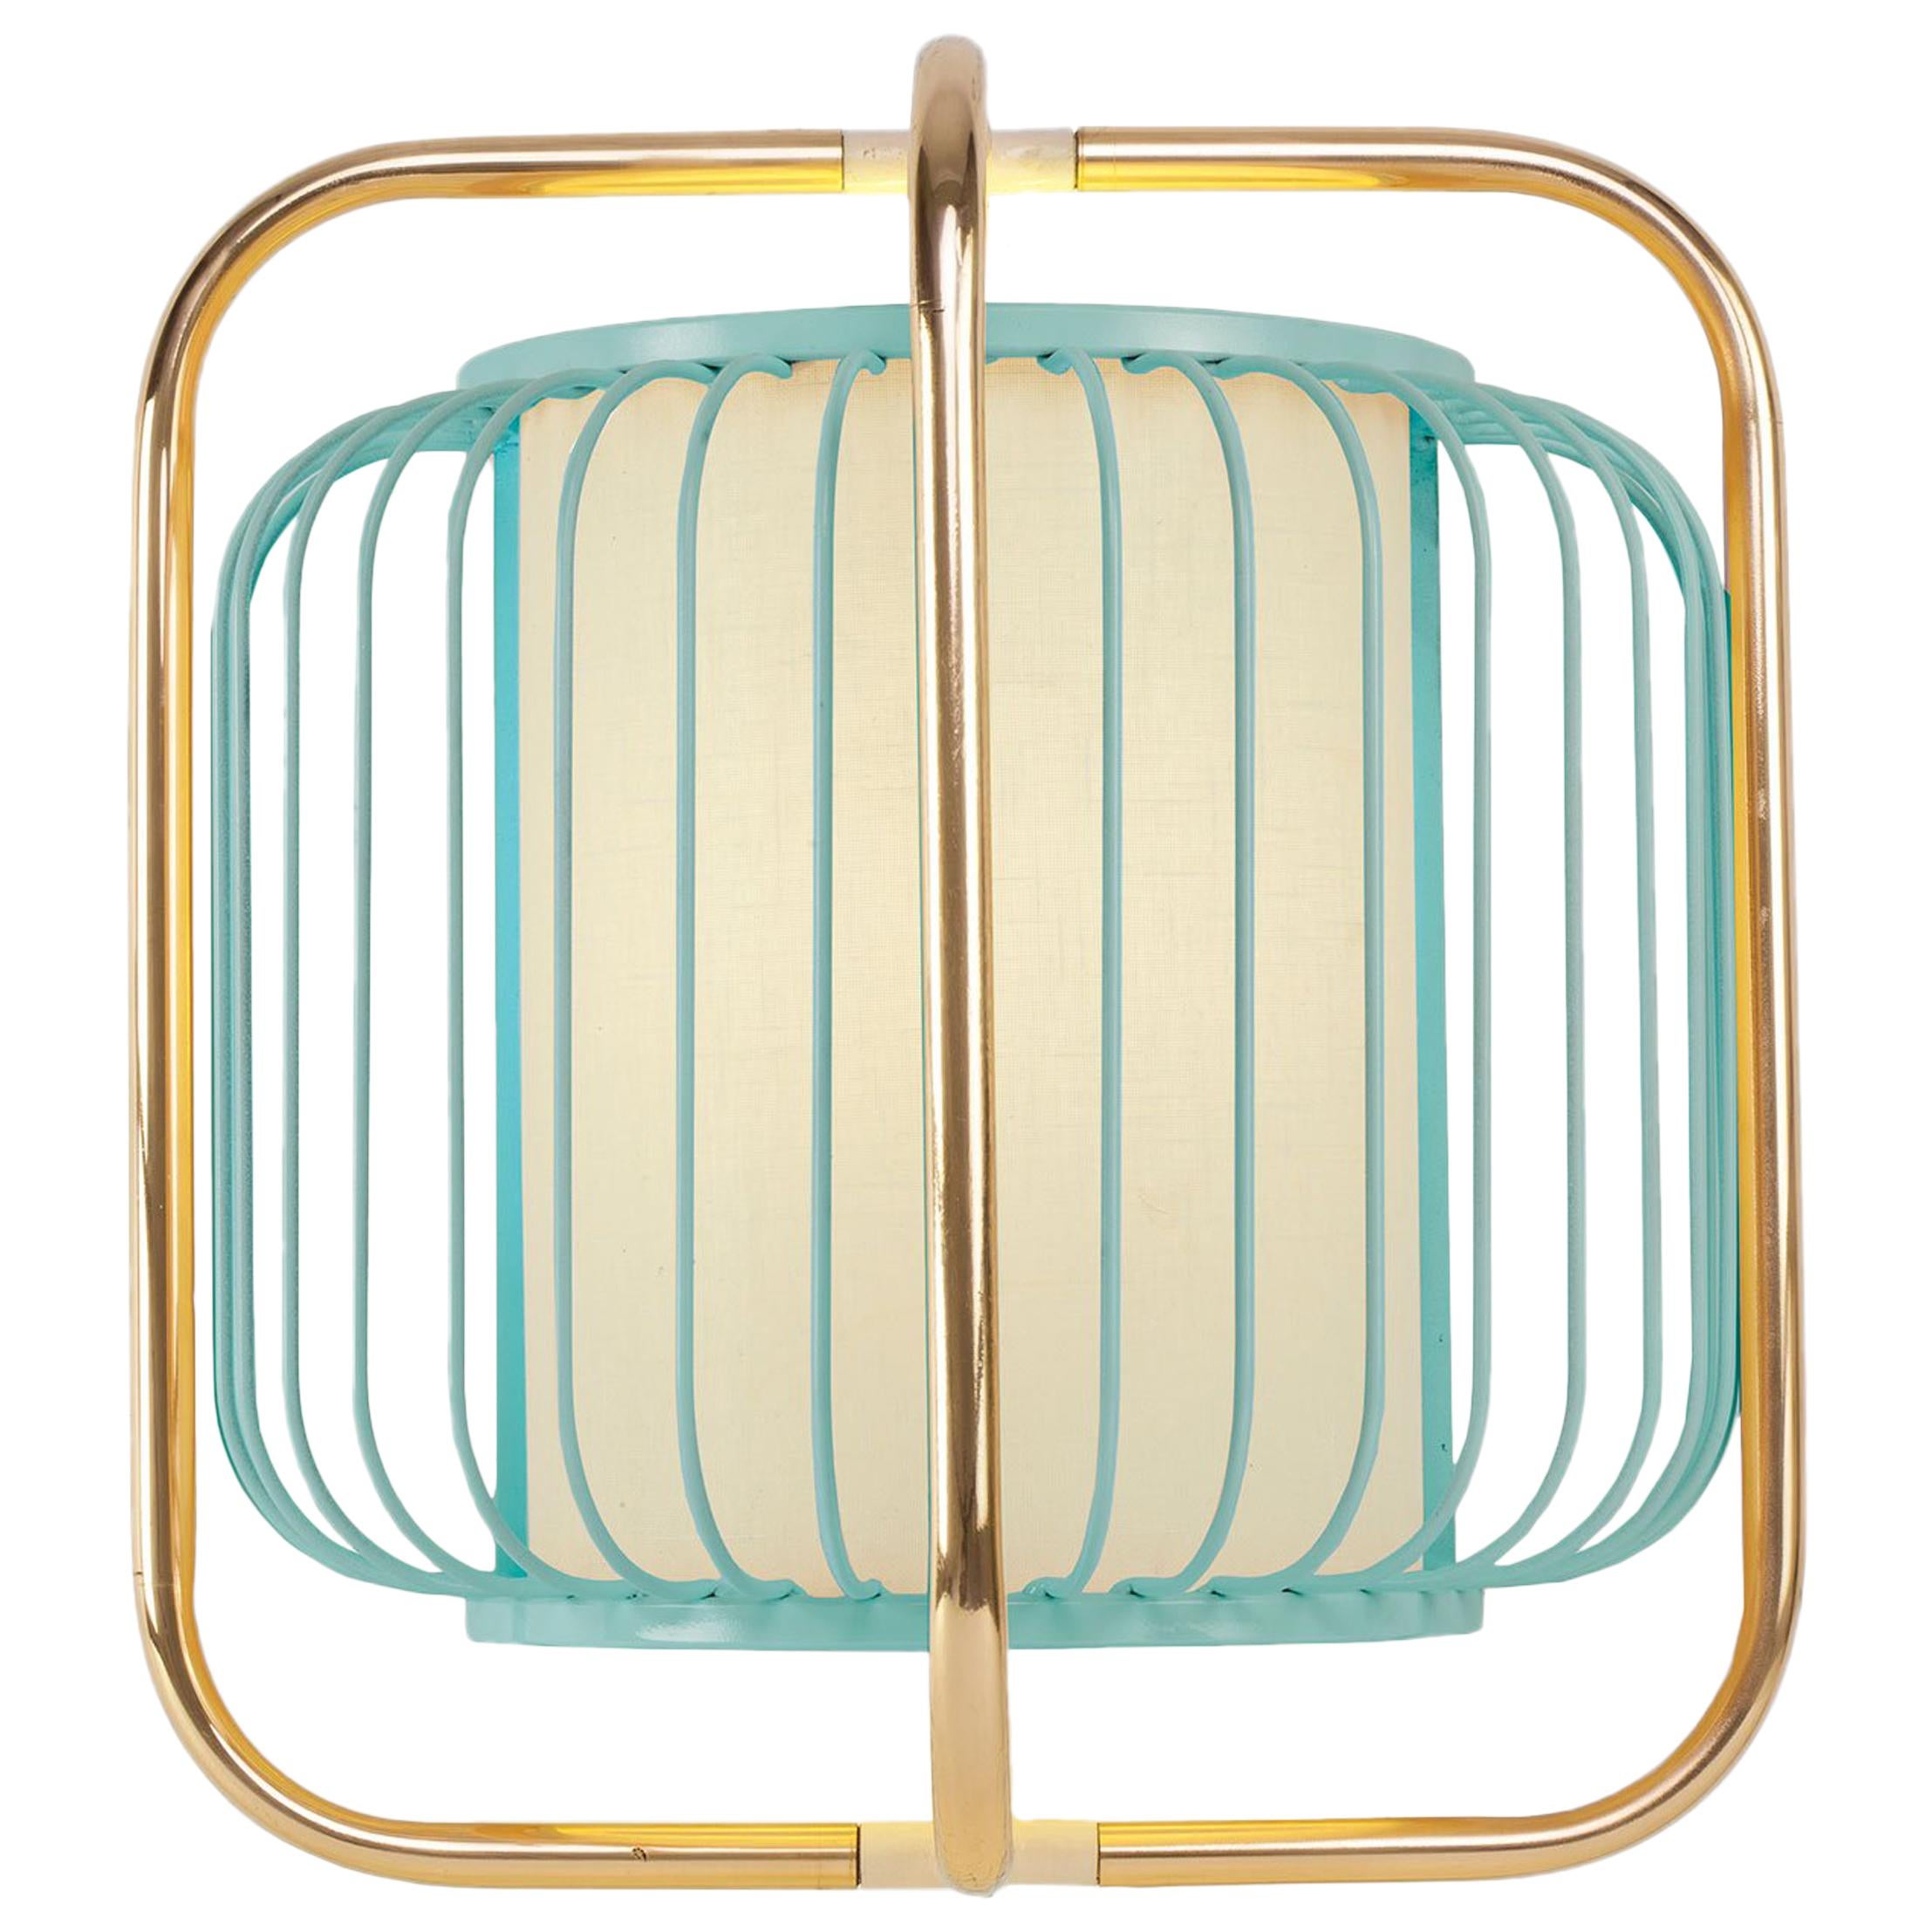 Contemporary Art Deco inspired Jules Wall Sconce in Jade Blue, Brass and Linen For Sale